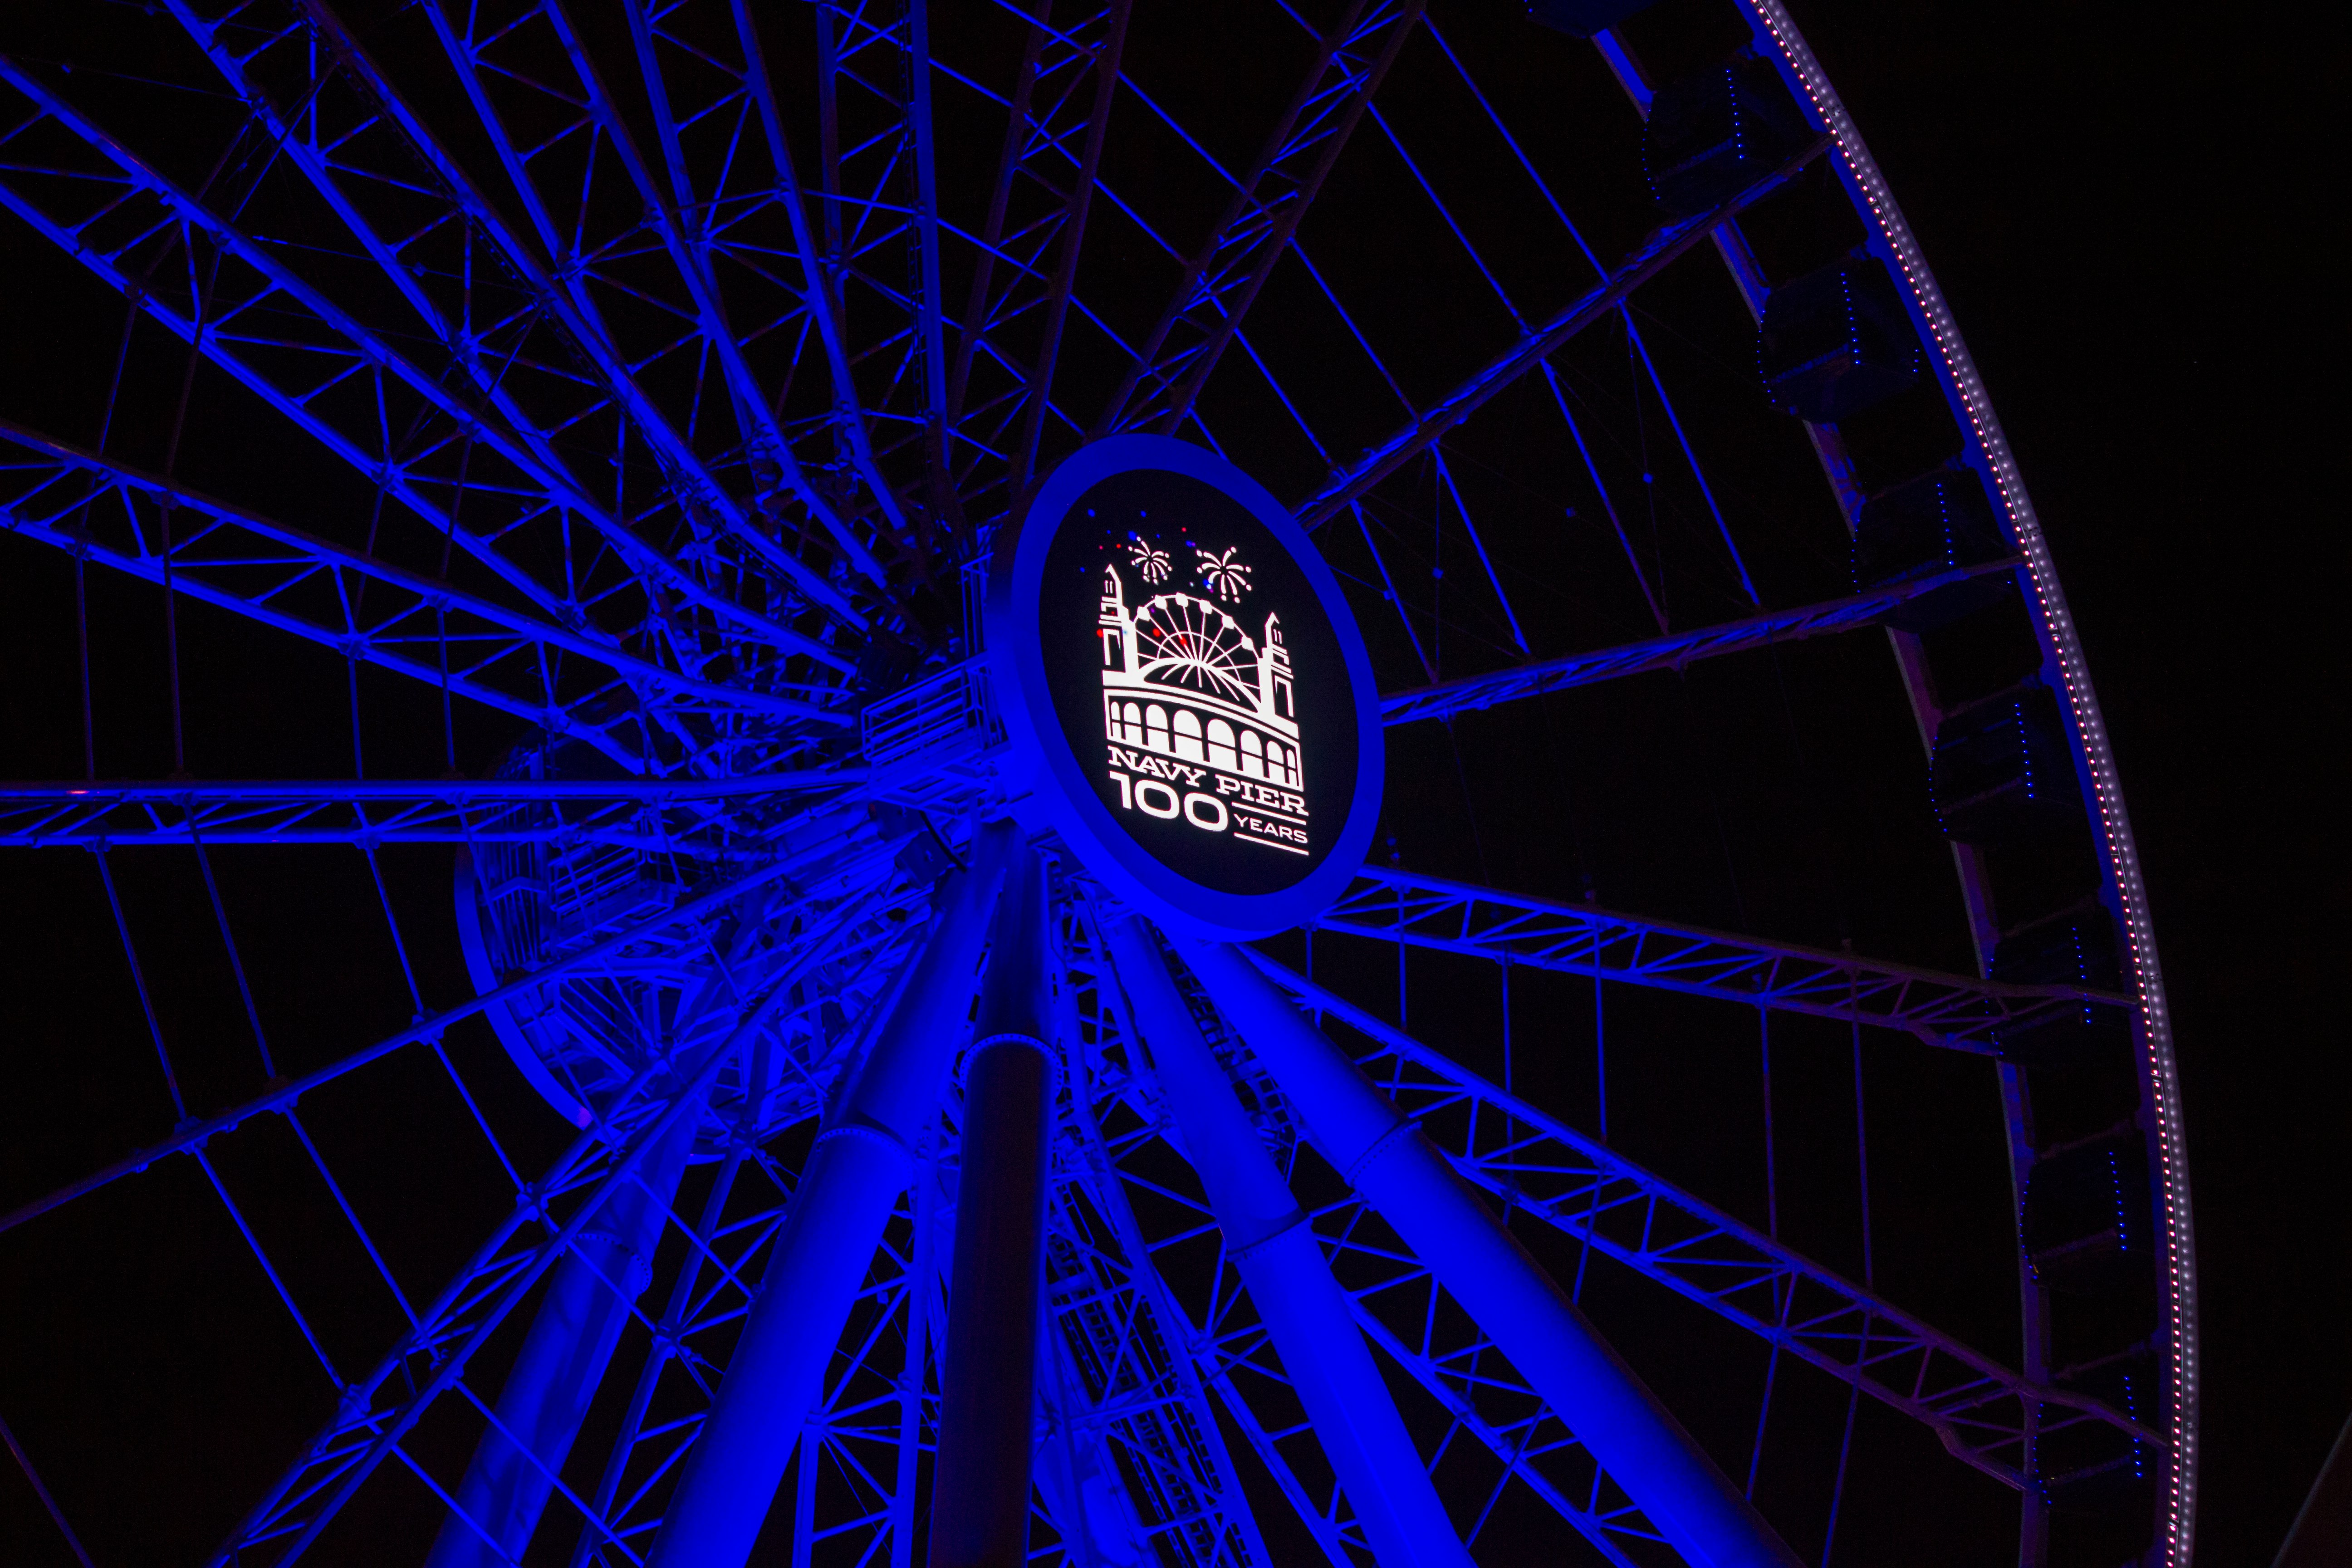 blue Ferris wheel with lights turned-on